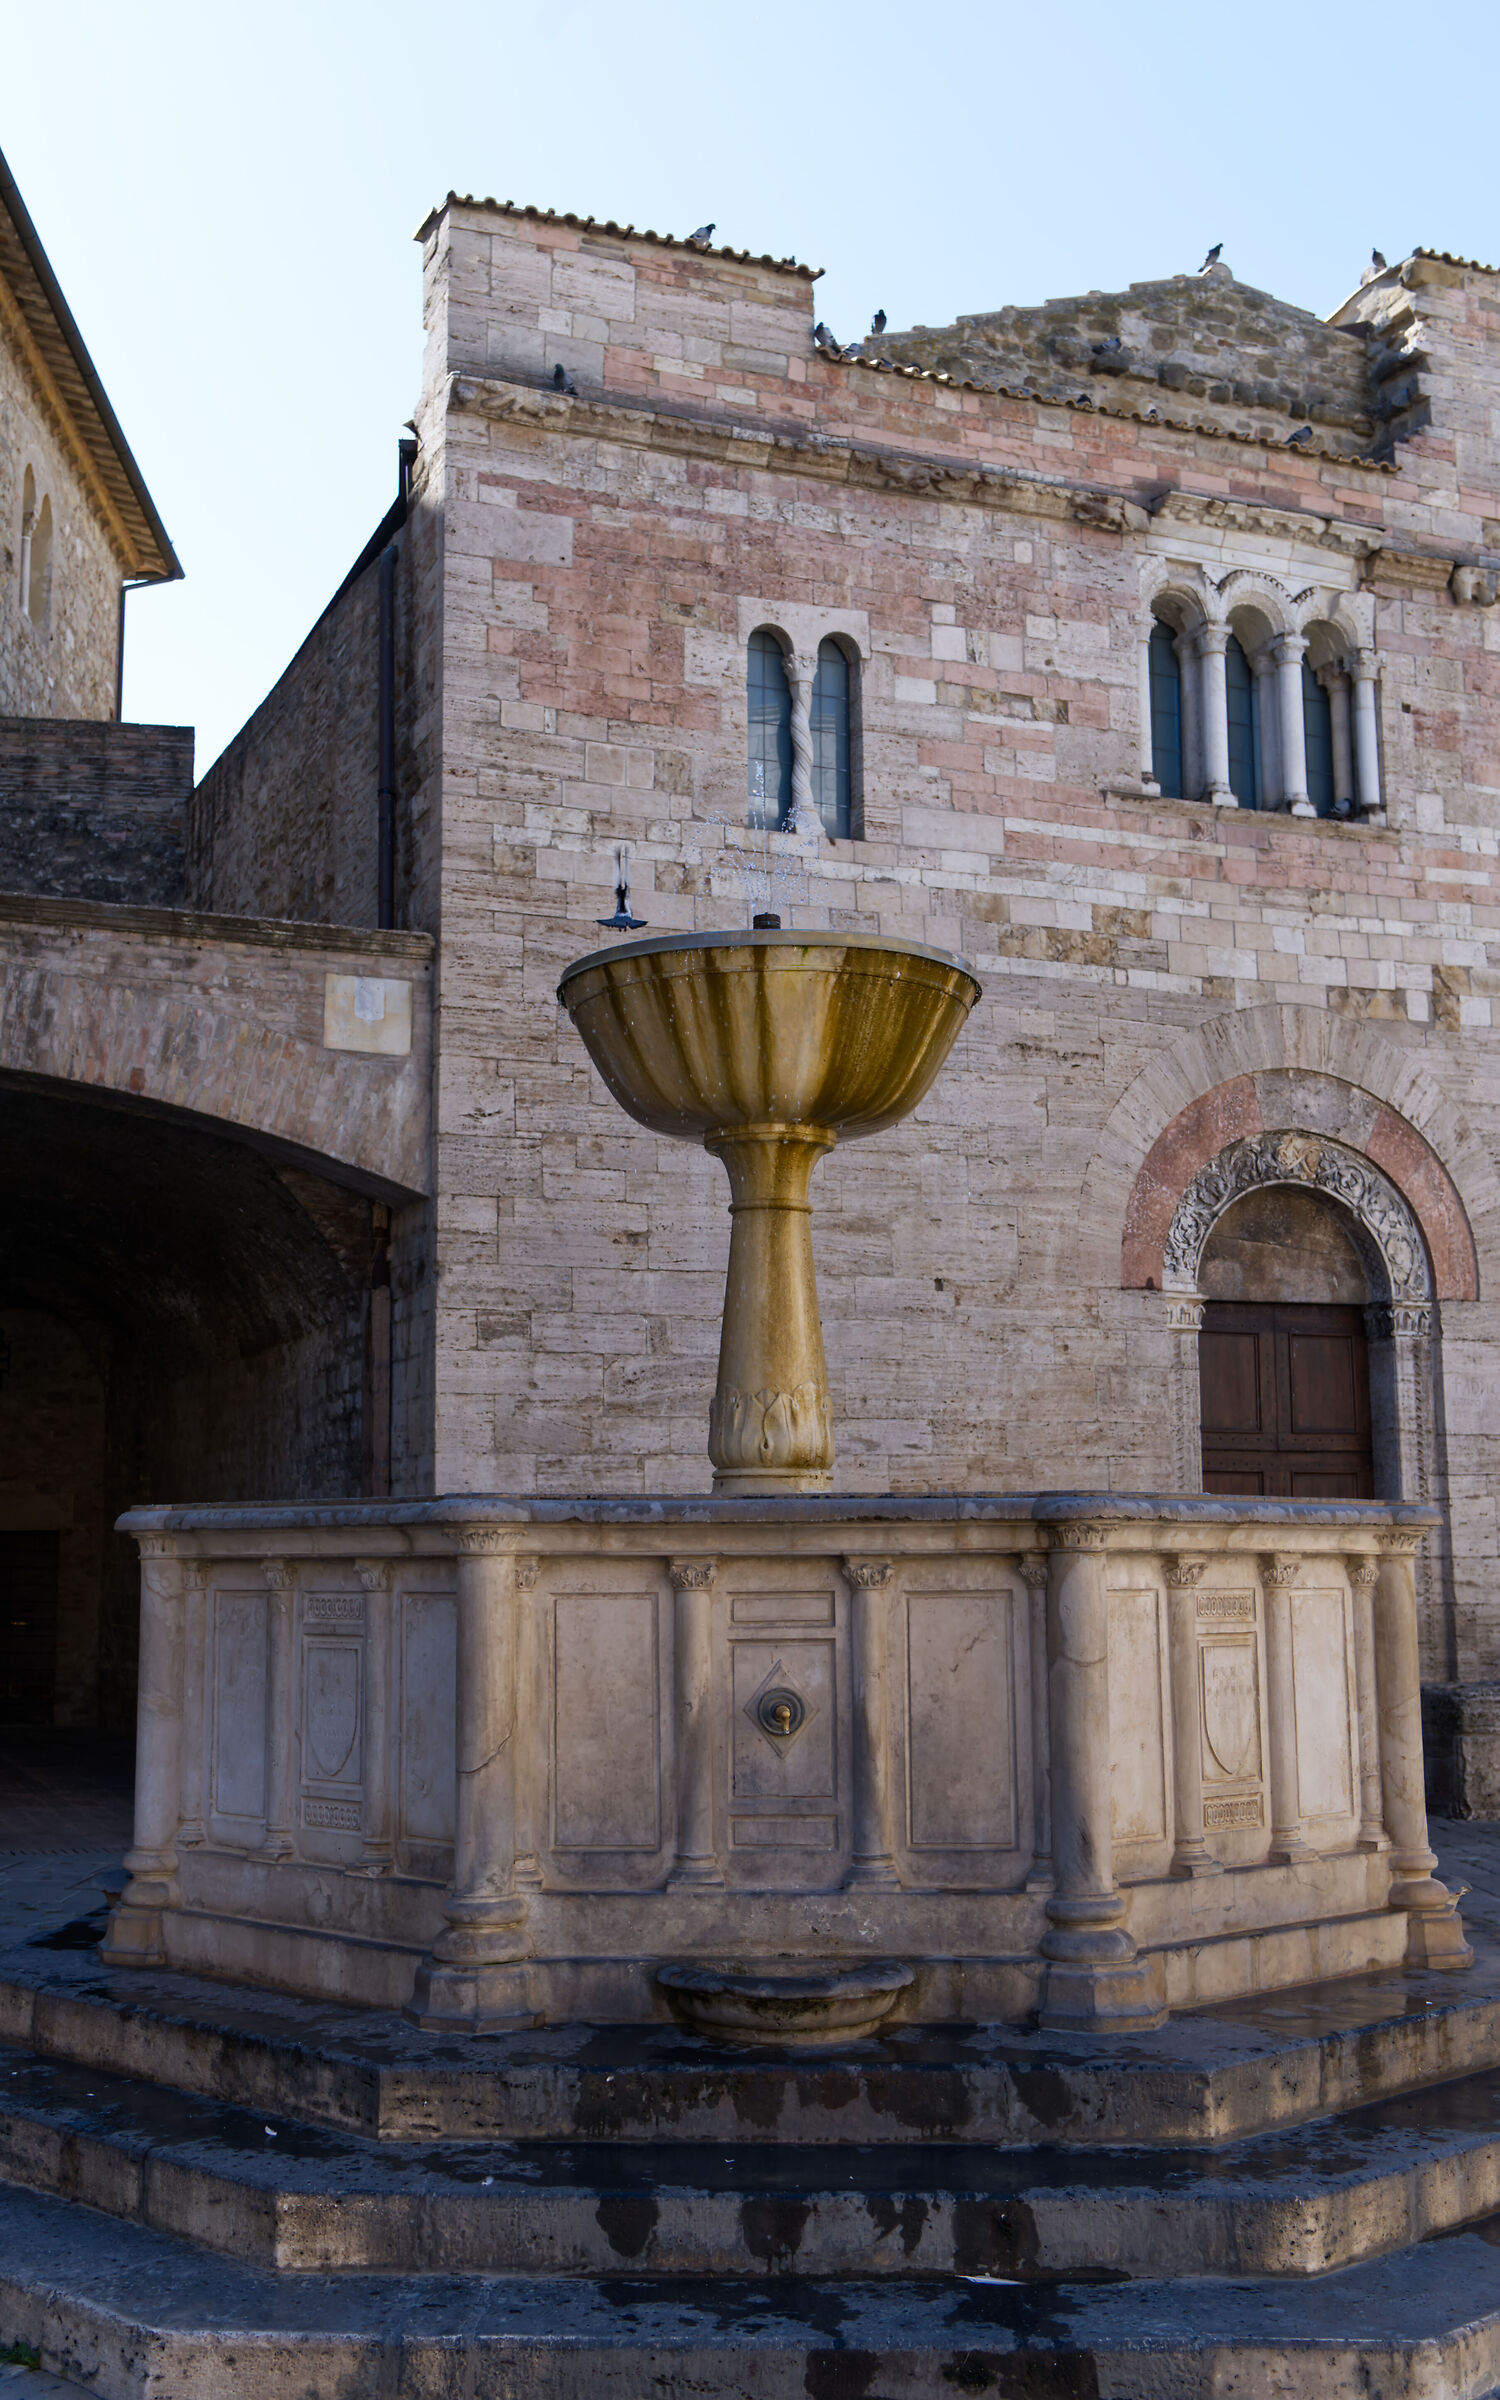 The fountain of Bevagna...